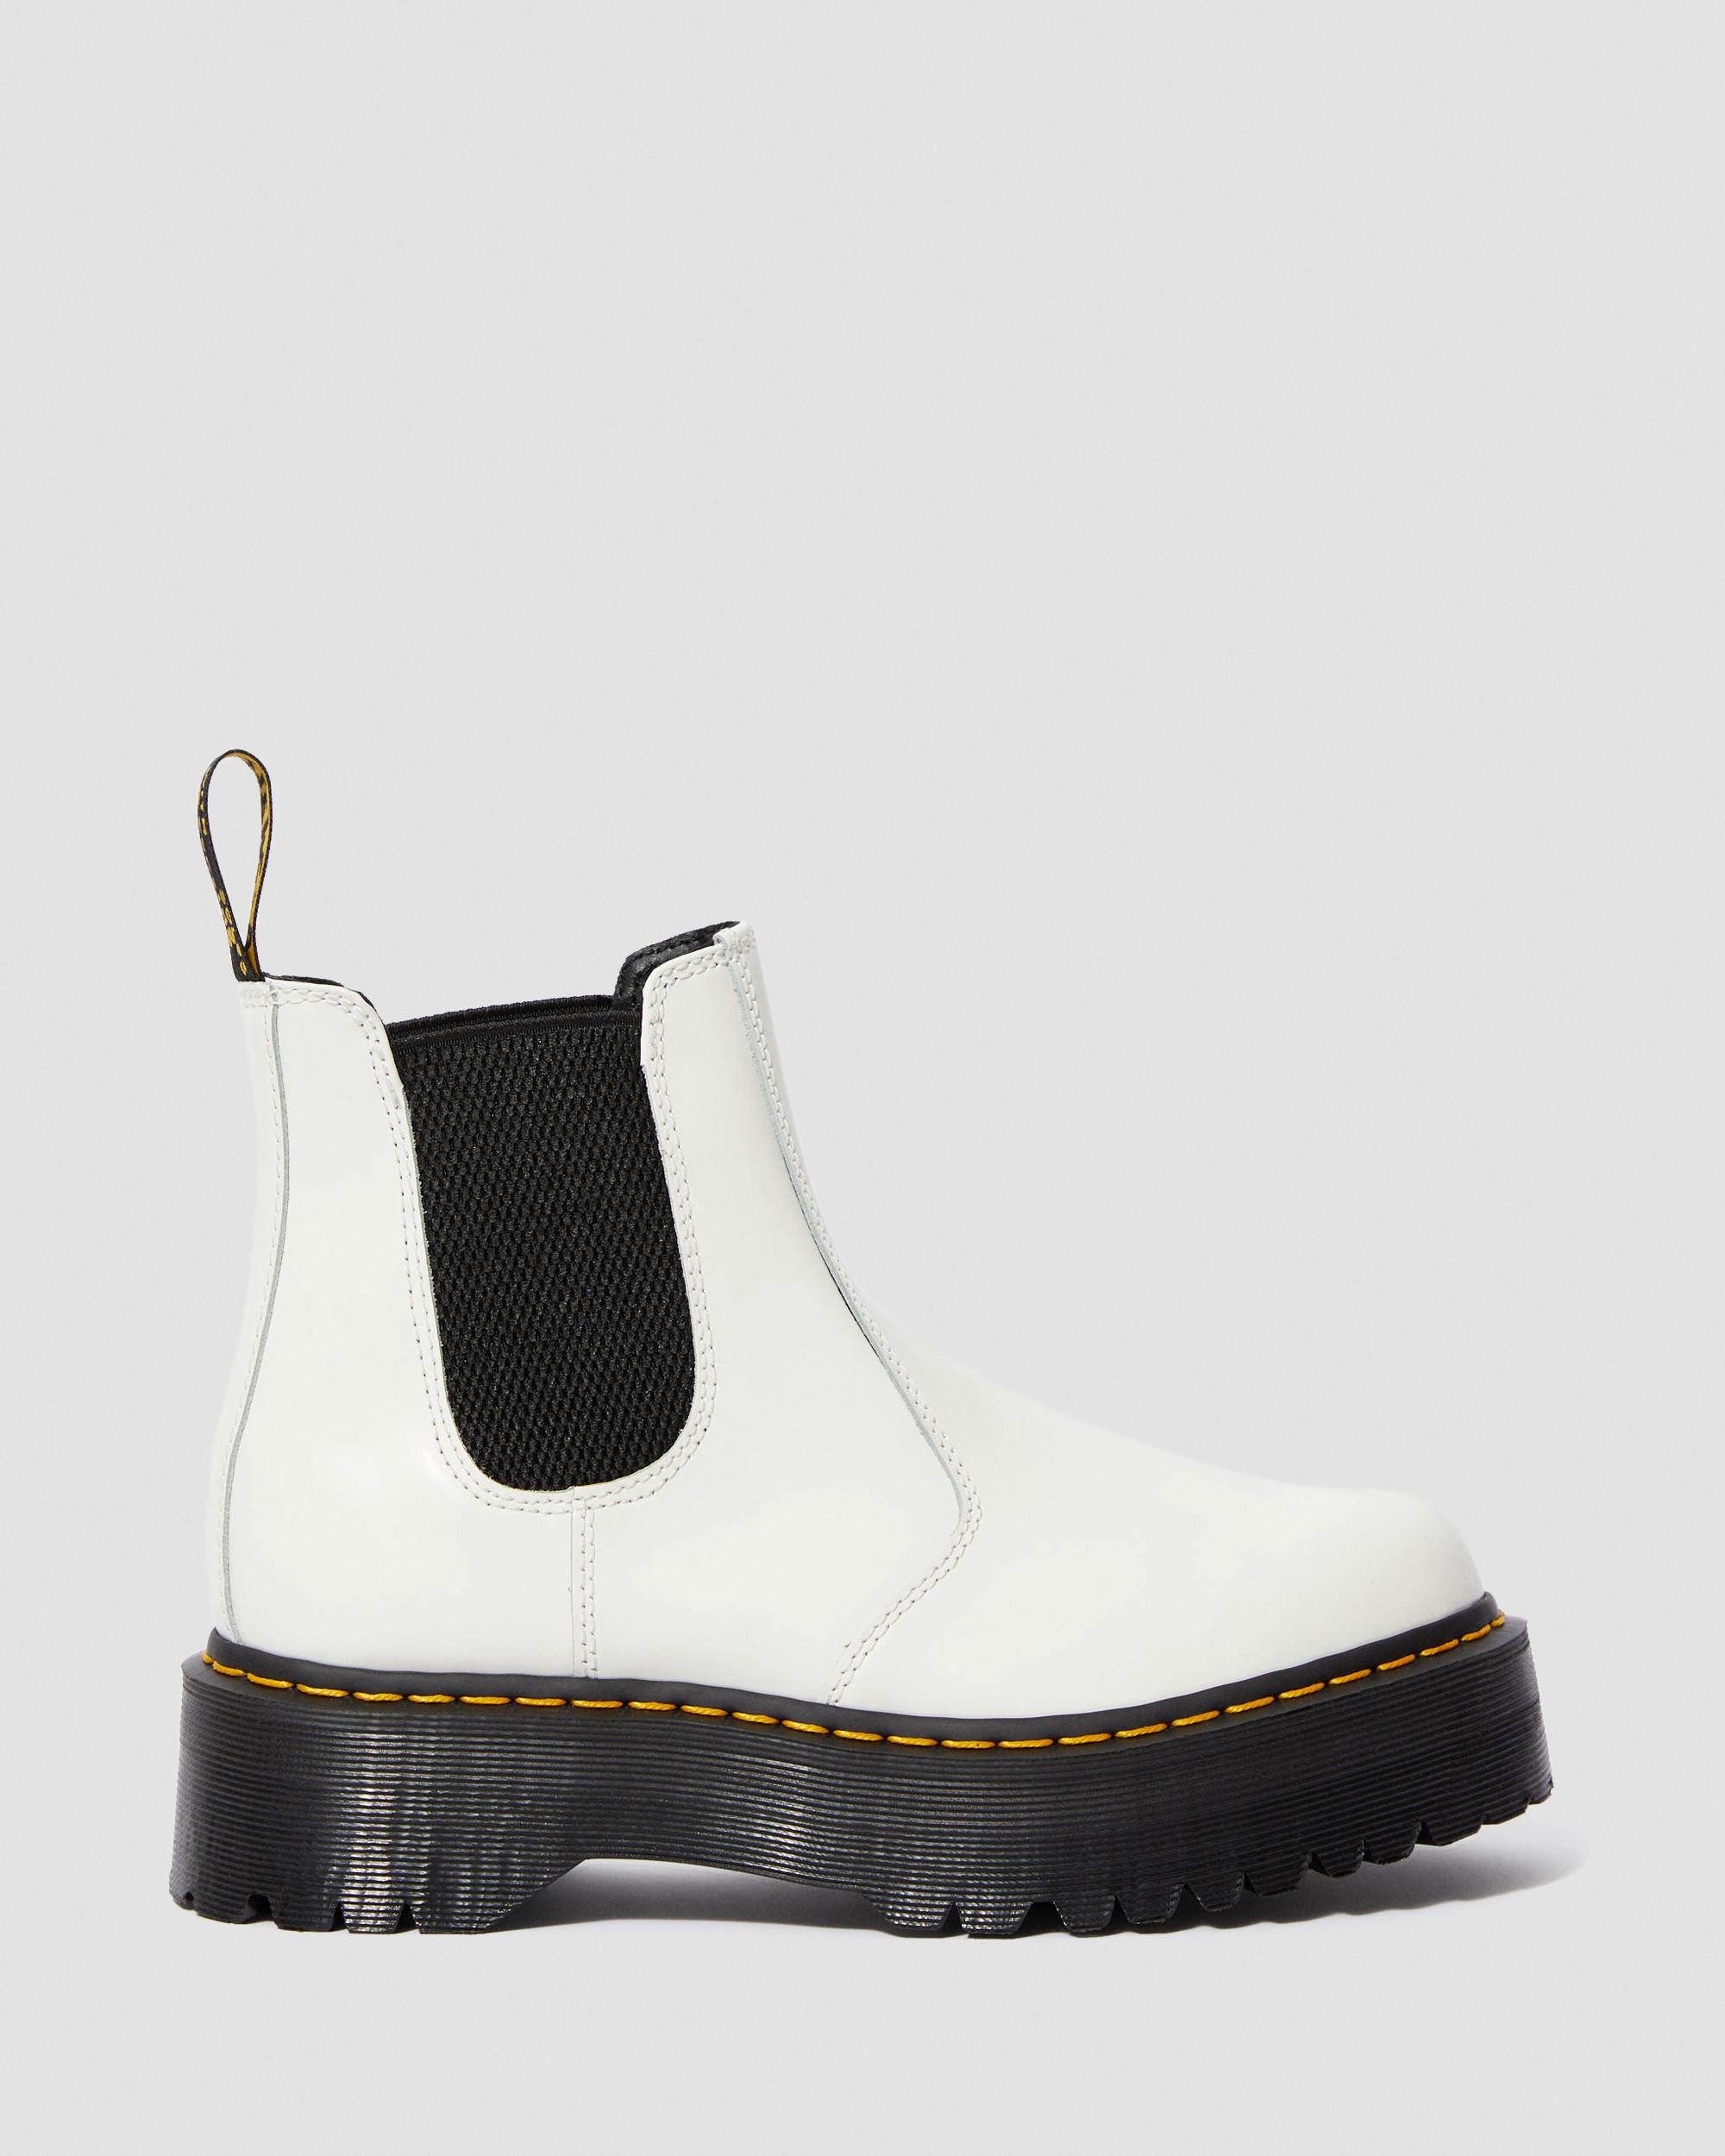 Dr Martens 2976 YS Women's Classic Leather Chelsea Boot in White Size 11 